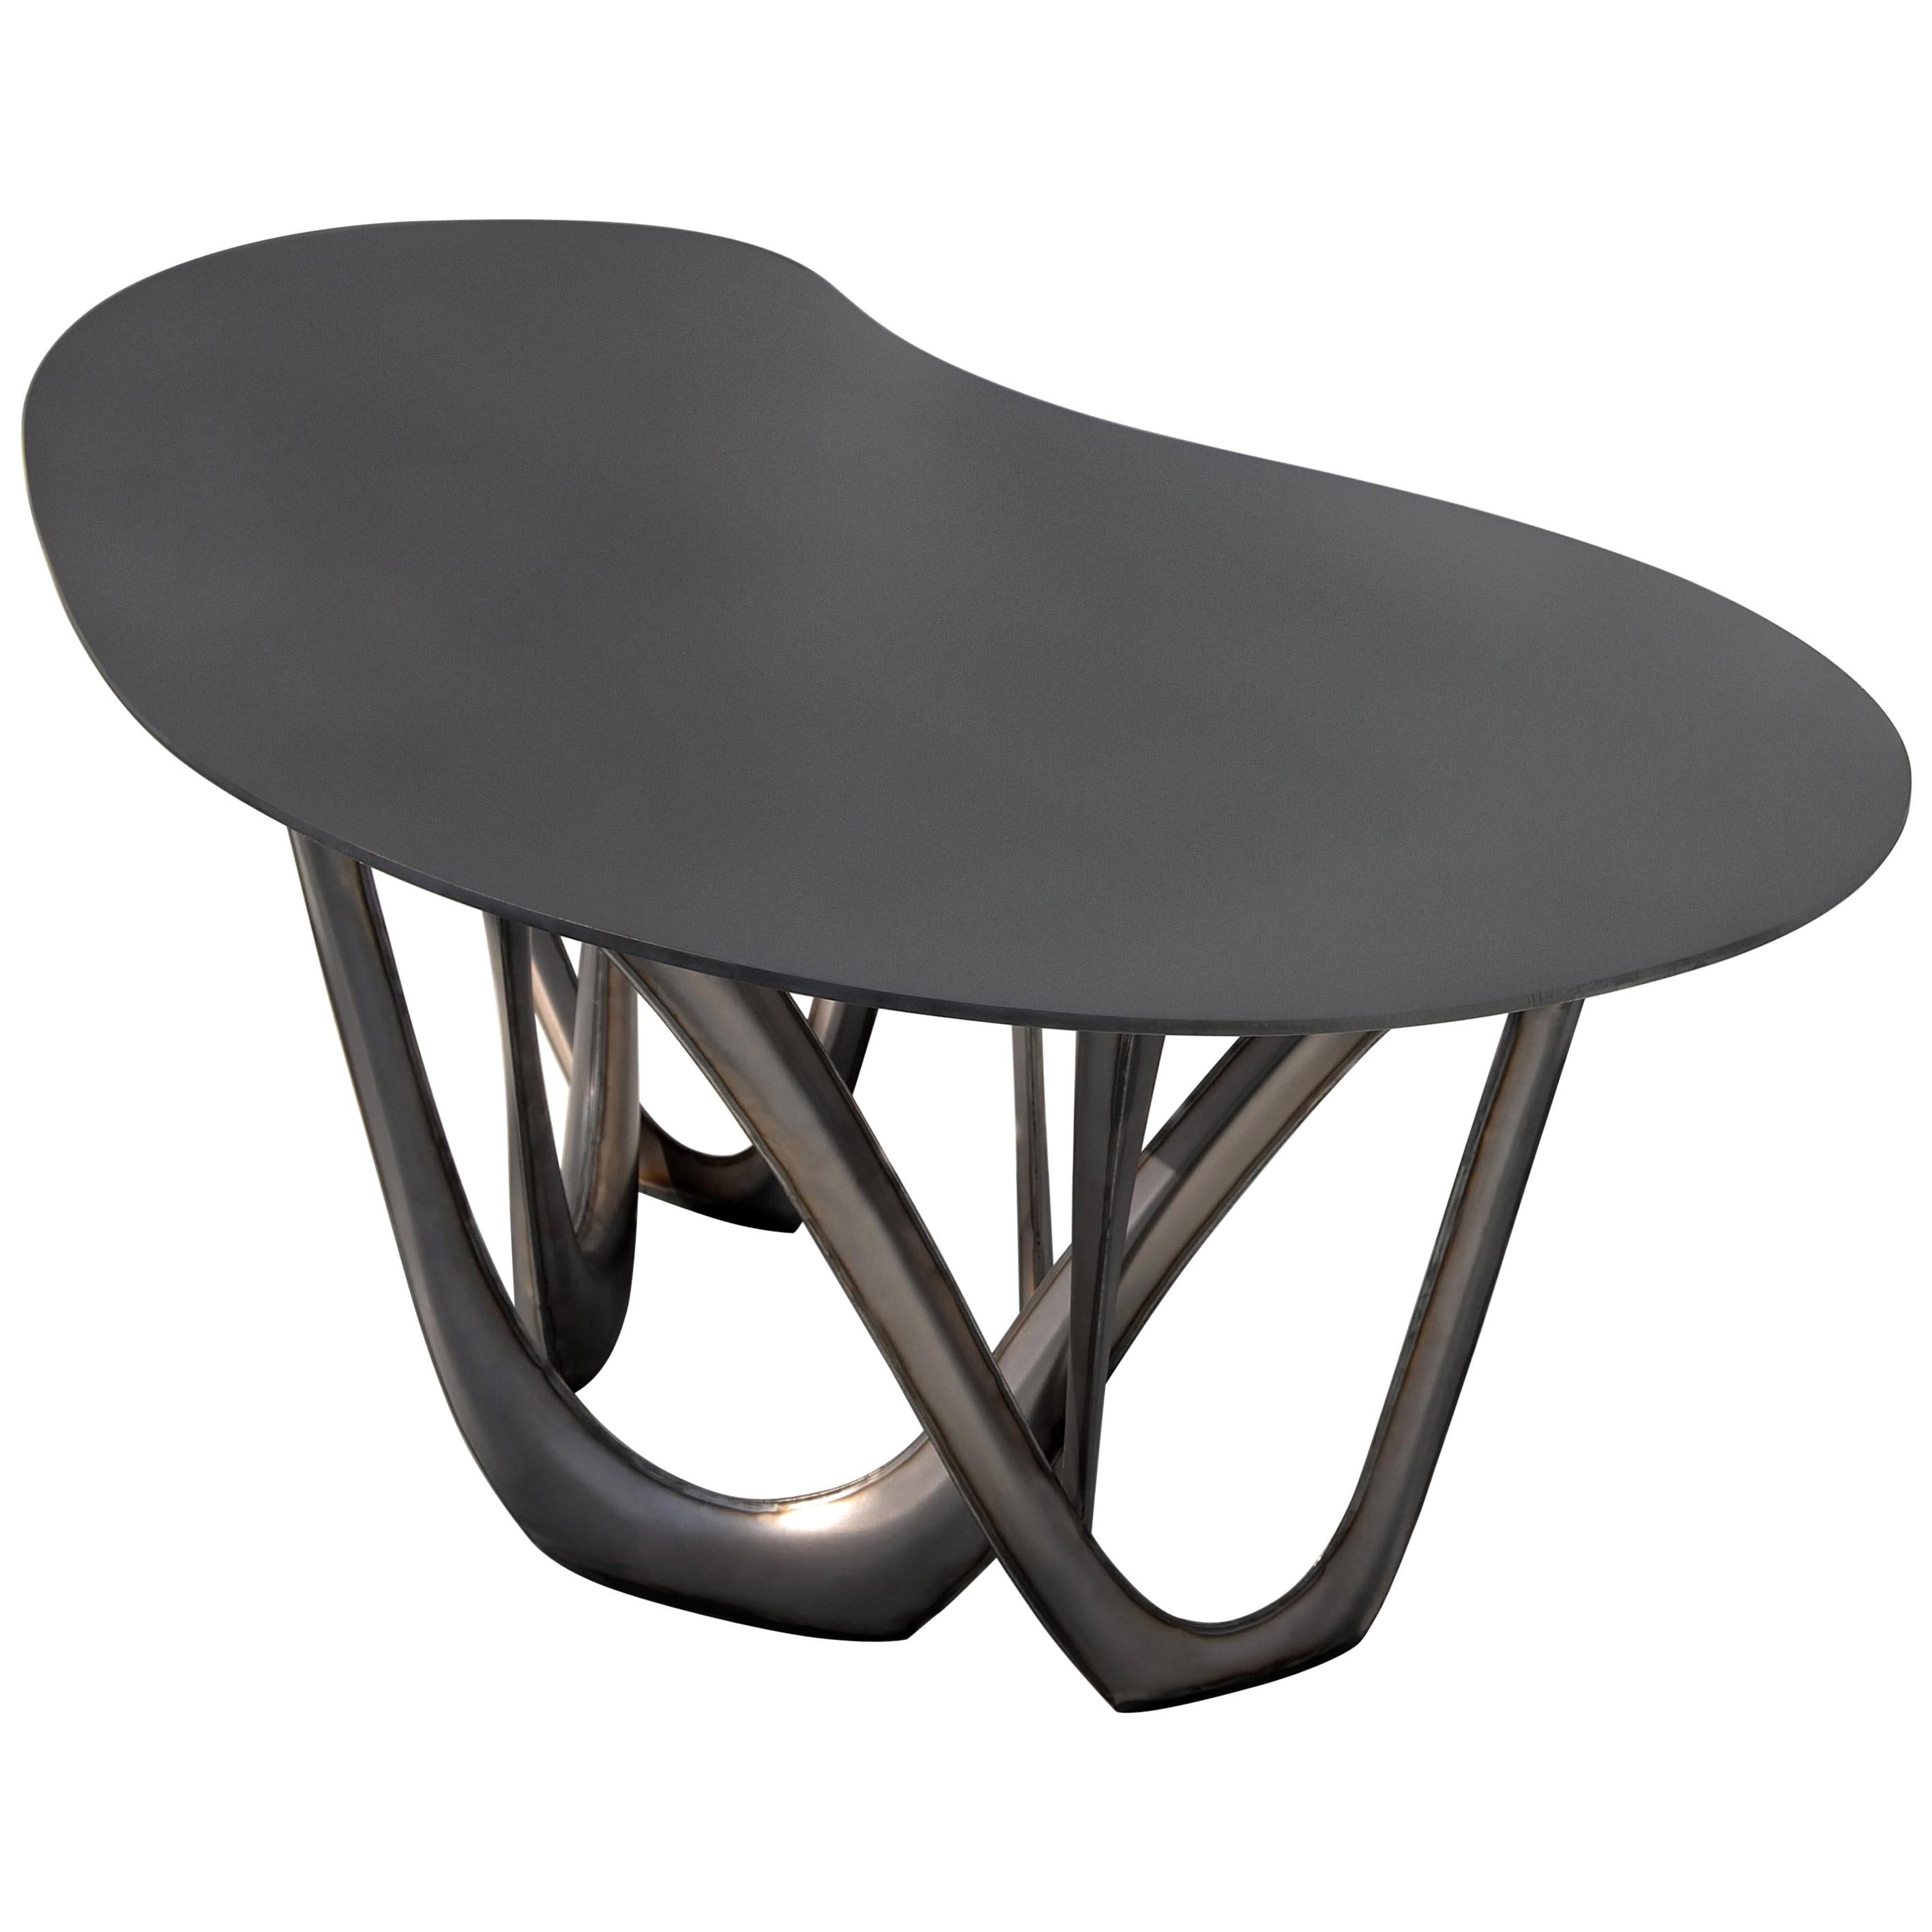 G-Table by Zieta, Carbon Steel Base and Concrete Top For Sale